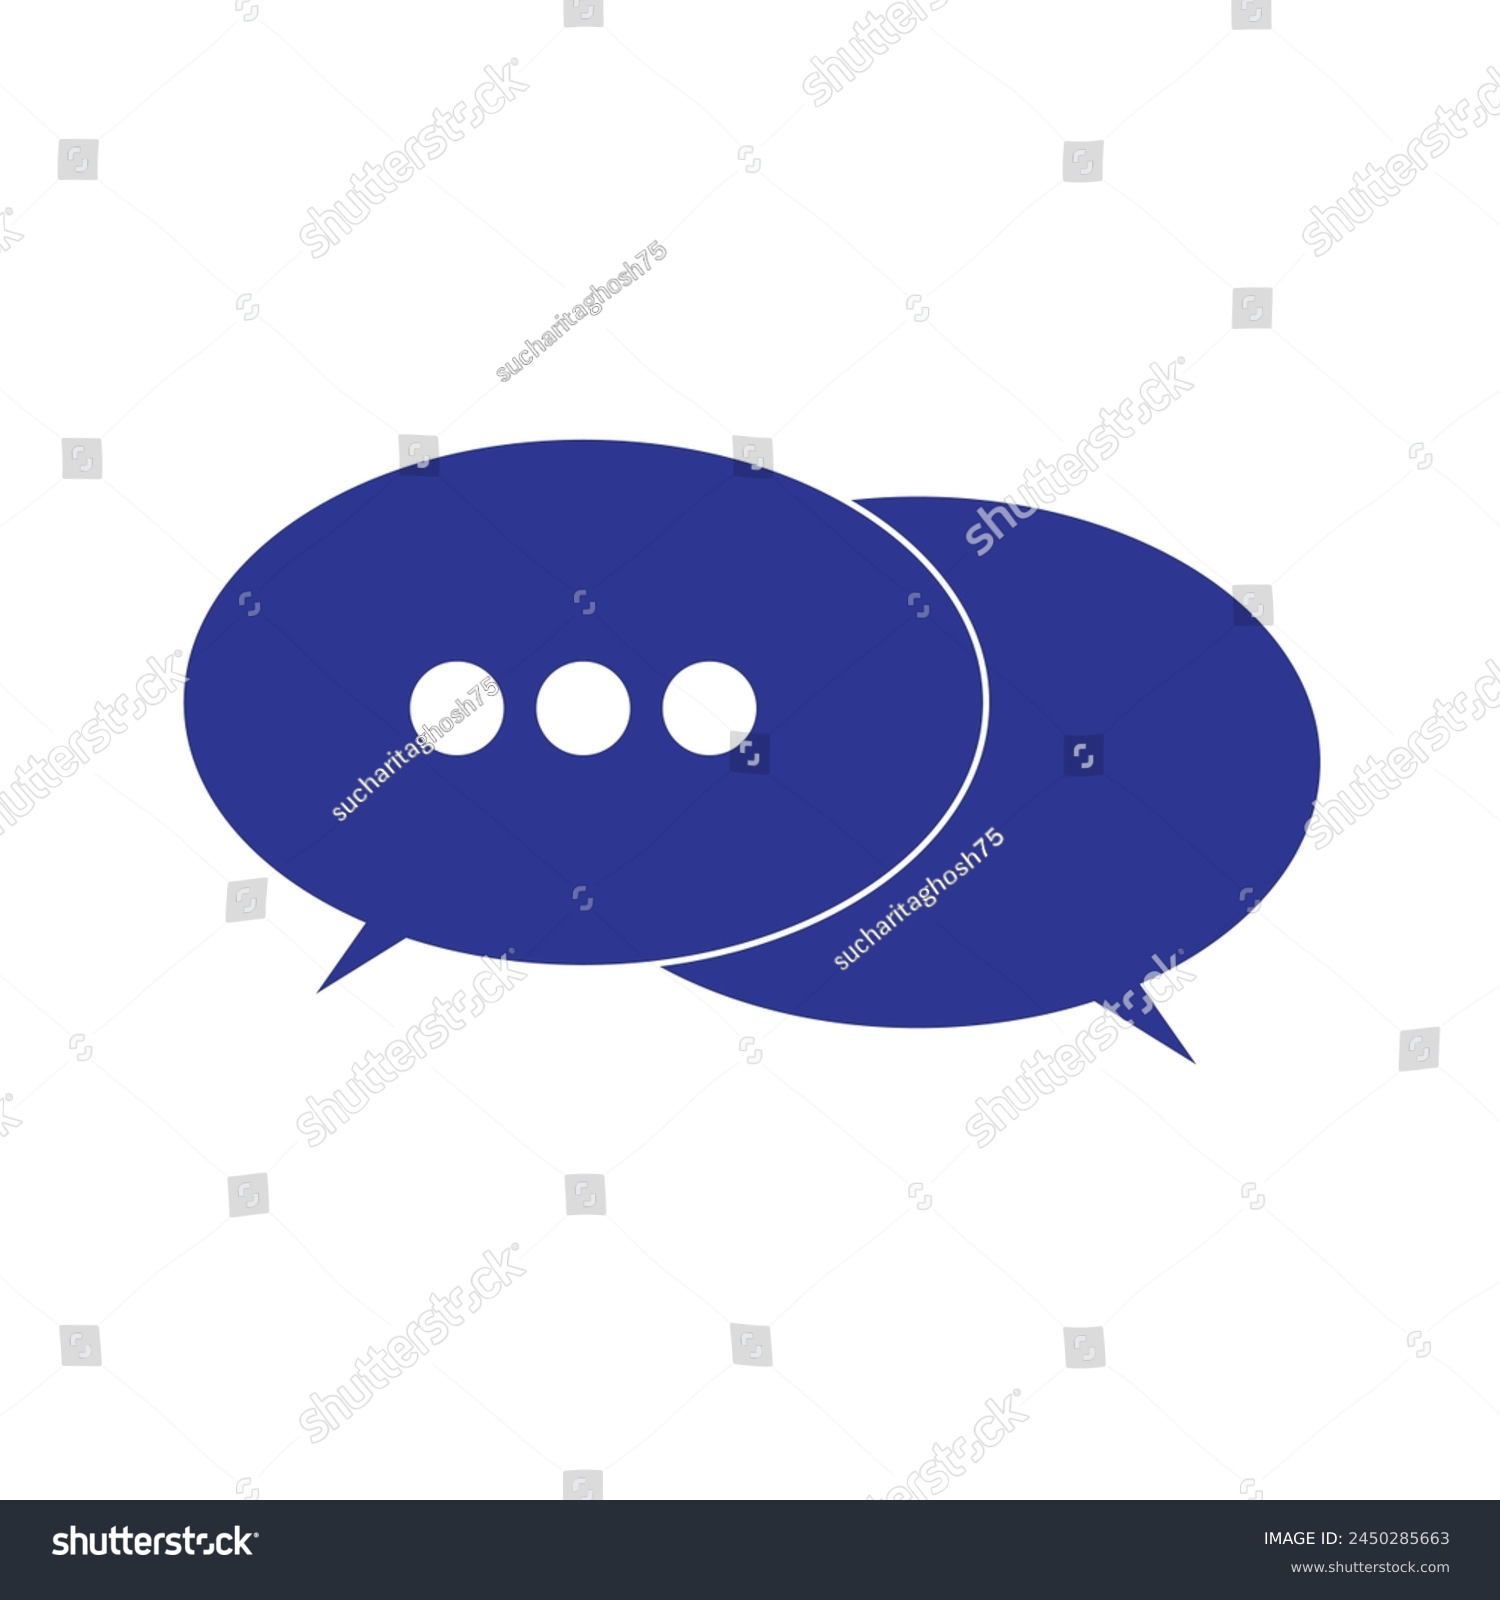 SVG of Chat icon, chat, bubble, comments icon, speech bubbles blue color Icon. Chat icon vector for web and mobile app. Vector illustration. Eps file 403. svg